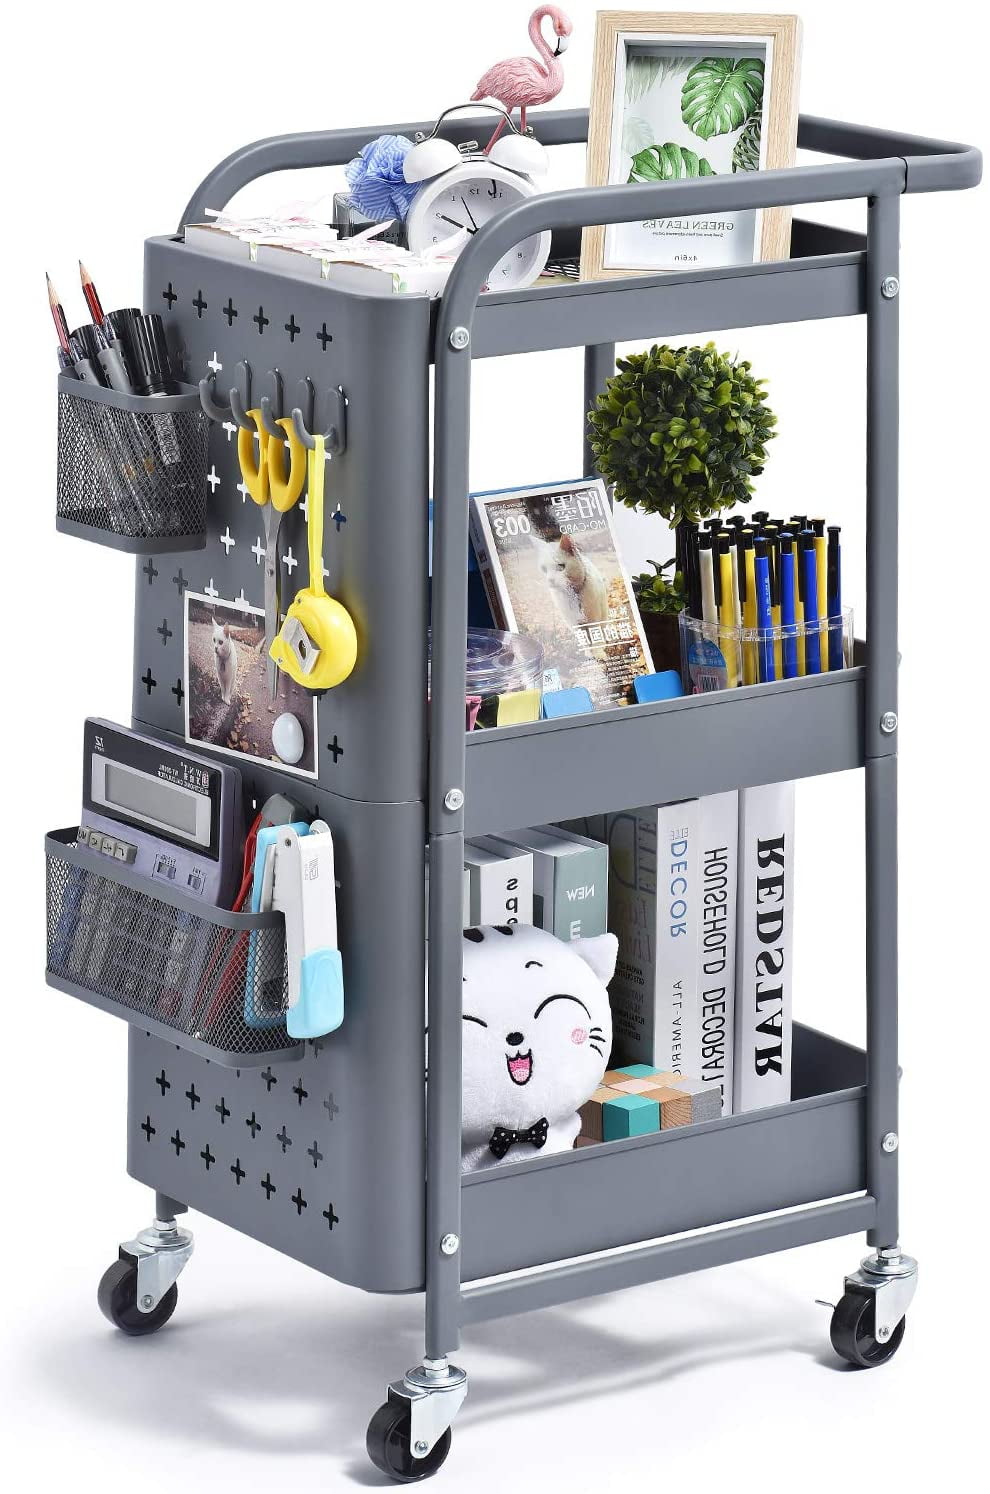 Metal Utility Cart with Removable DIY Pegboard Pink Trolley Organizer with 2 Lockable Wheels and 4 Extra Hooks for Kitchen Bathroom Home Art, 3-Tier Storage Rolling Cart Craft Office 